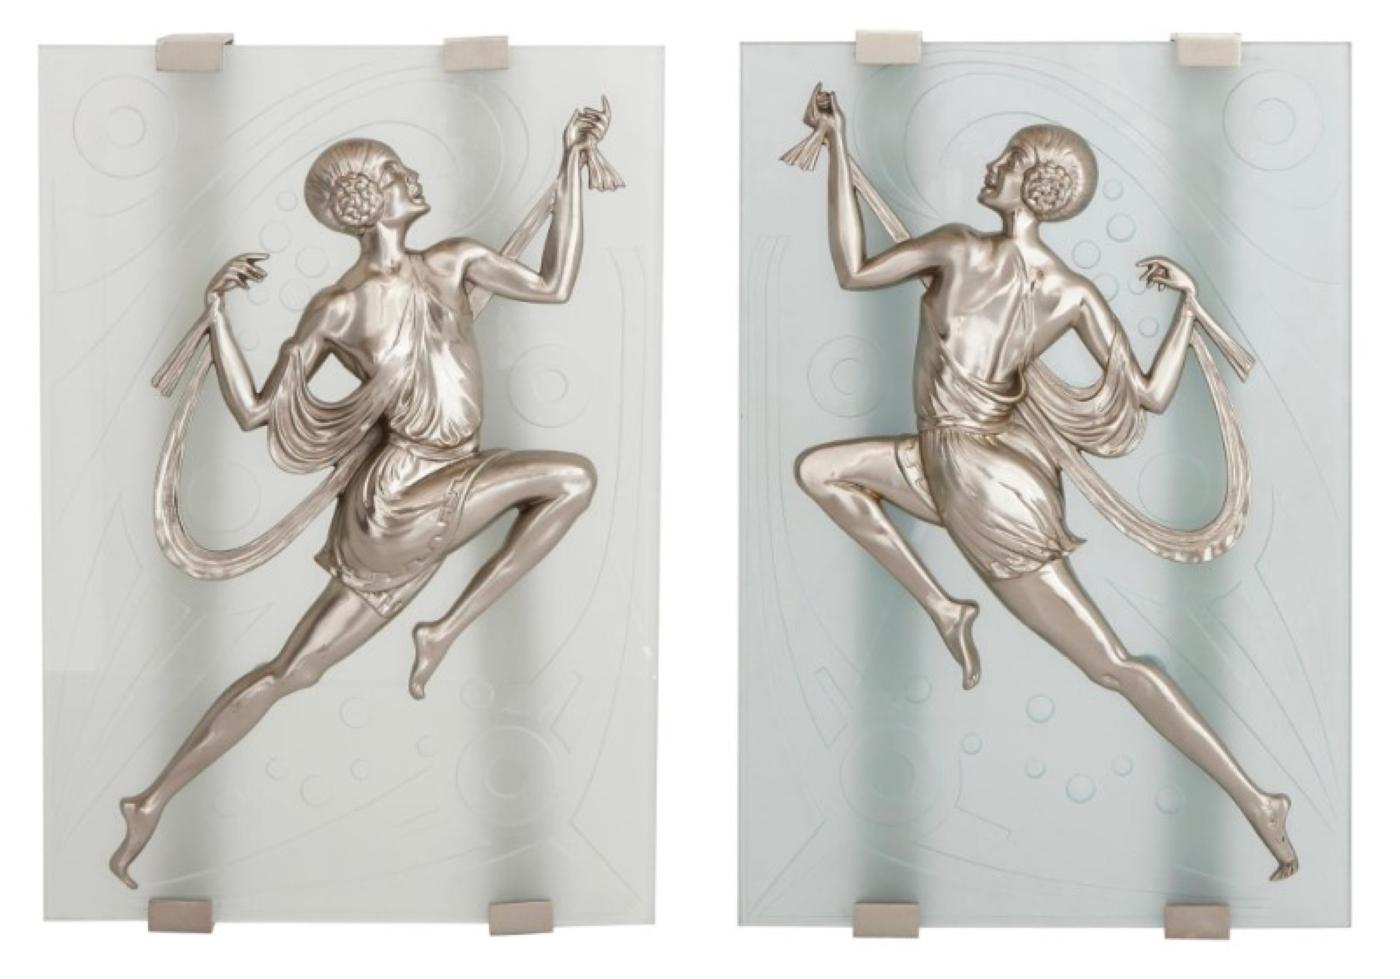 Impressive in scale, a pair of French Art Deco dancing ladies wall sconces. Depicted are front and back views of prancing female figures with draped Greek attire in dull nickeled bronze. Each figure is centered on a frosted glass panel enhanced with